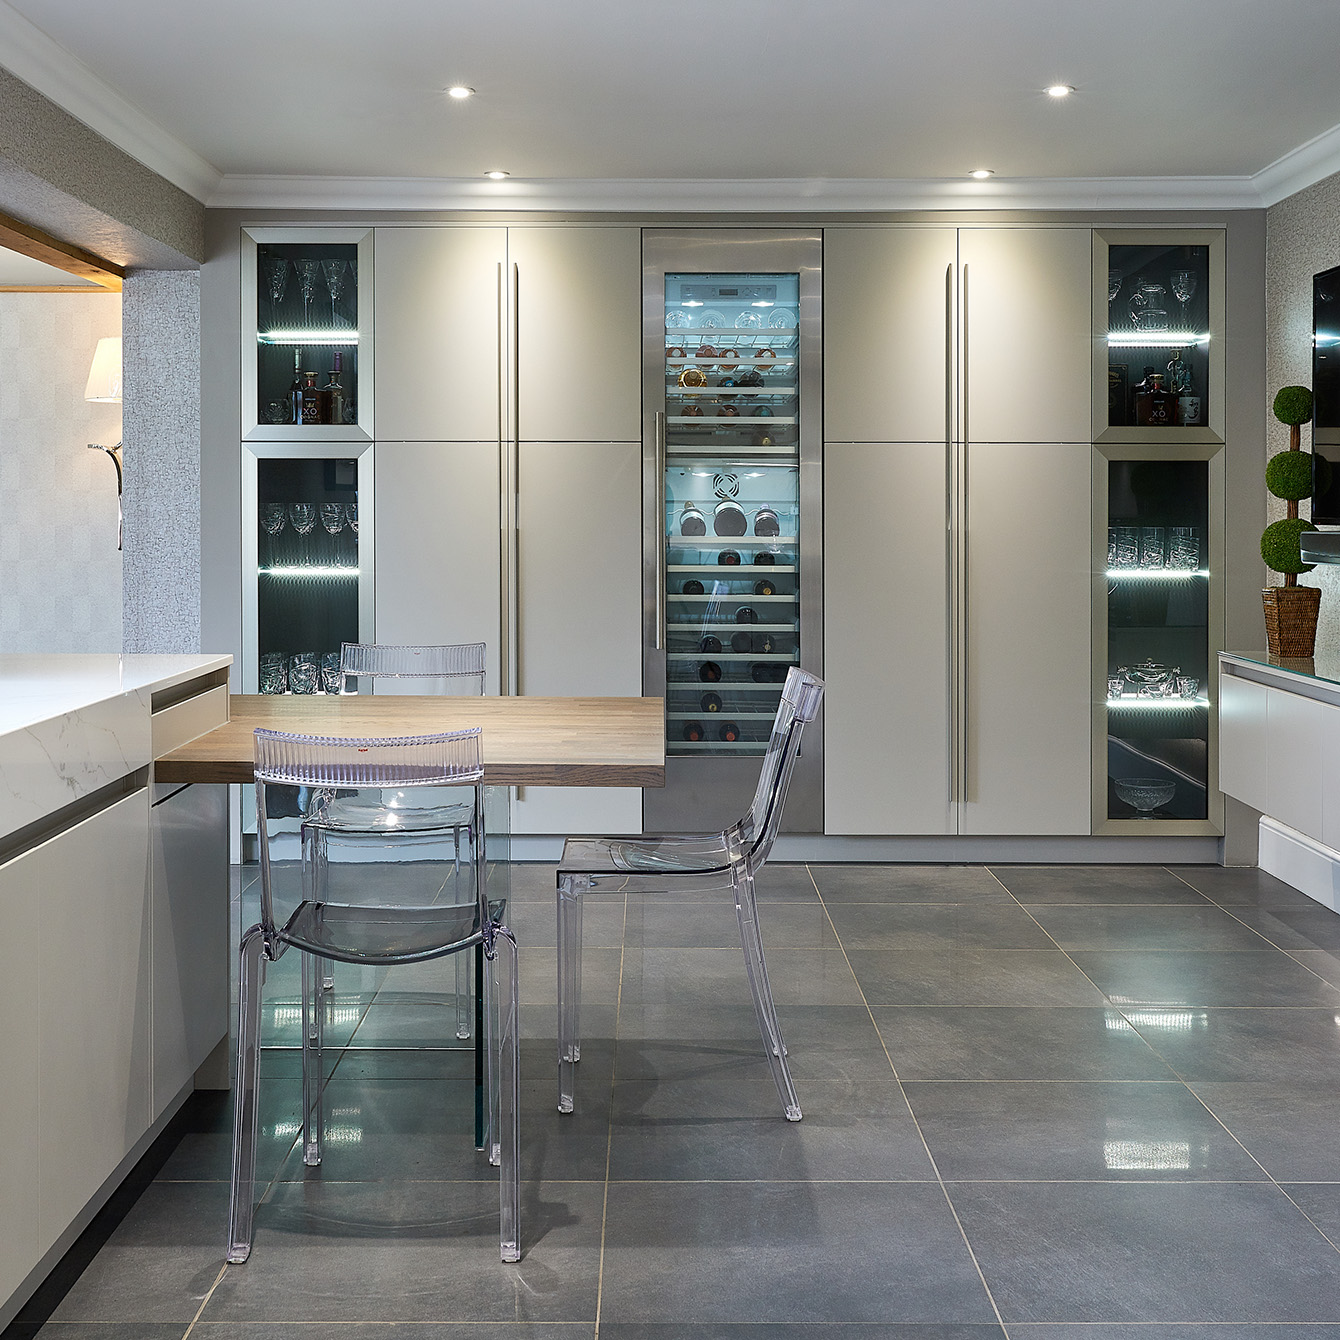 Stunning modern kitchen in Sutton Coldfield, designed by Galerie Design kitchen showroom in Warwick, Warwickshire - The kitchen features a tall wine fridge and siemens appliances with Led light in the kitchen